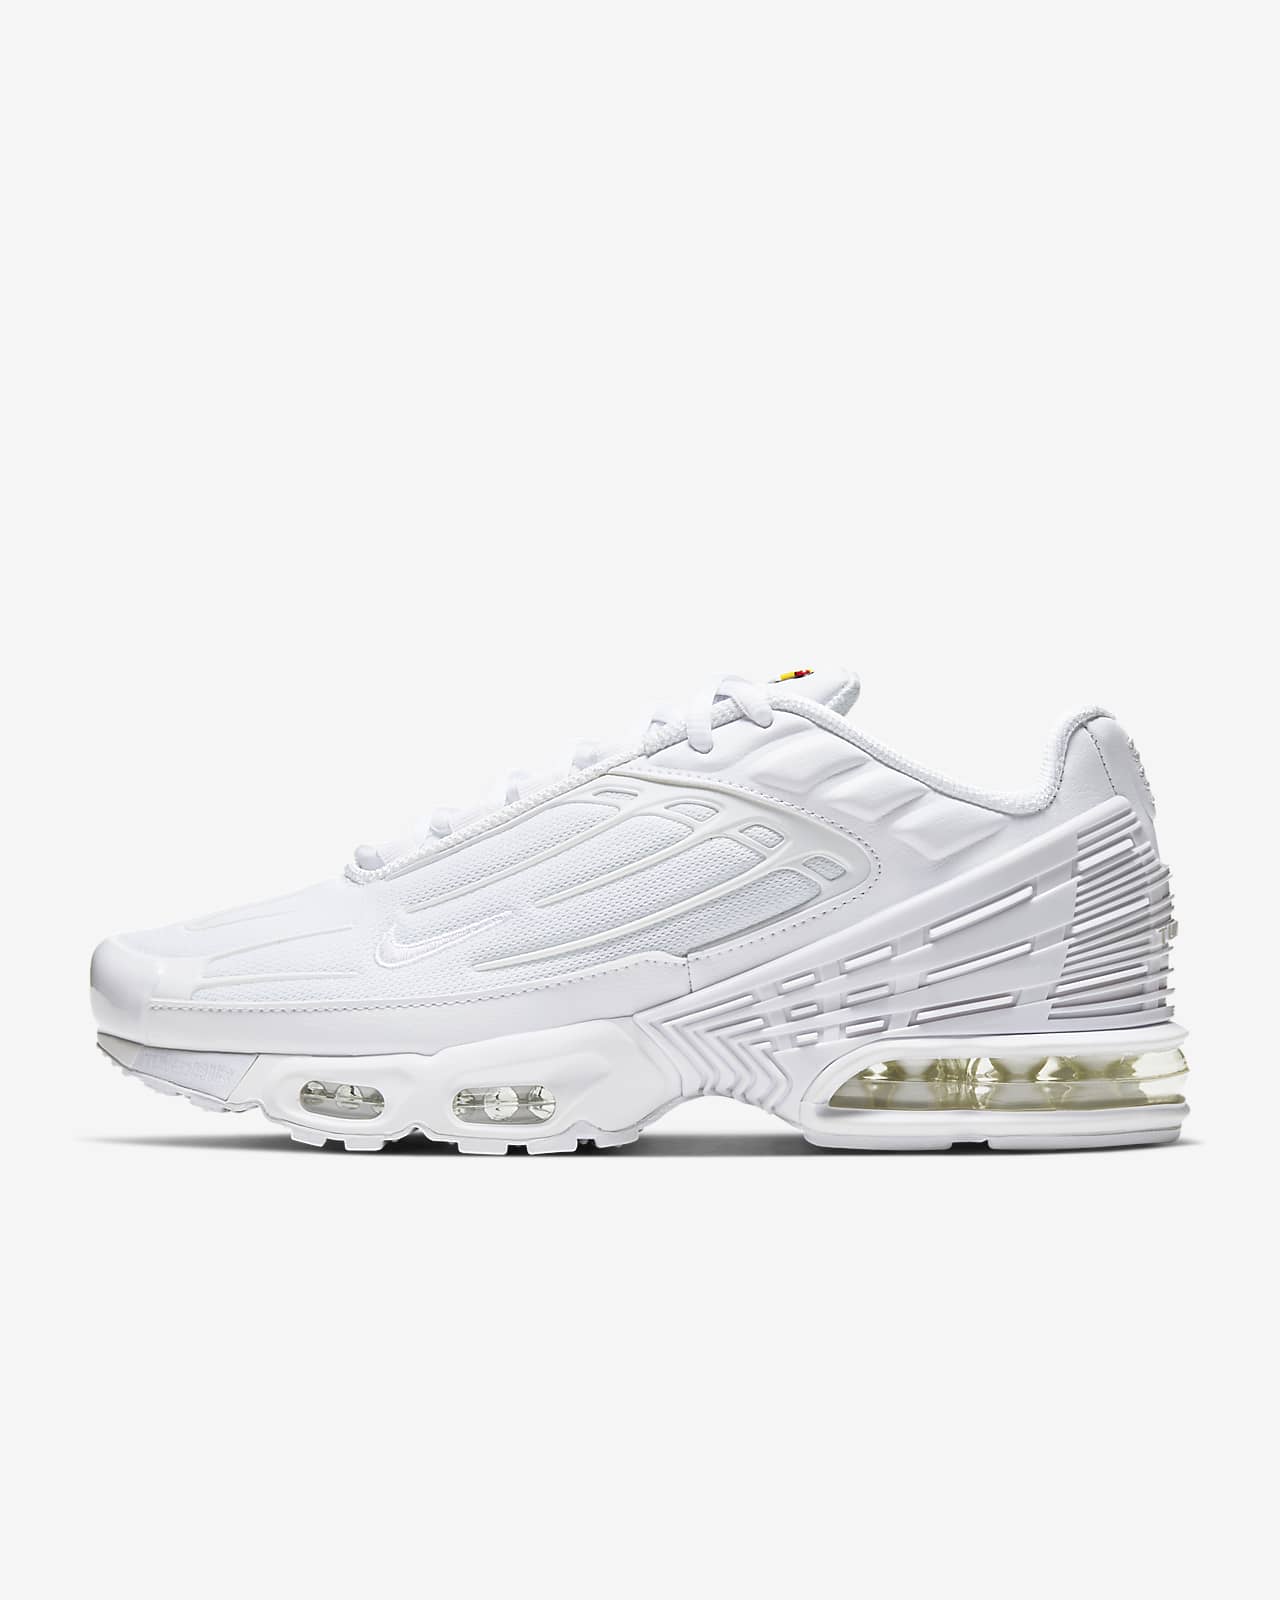 Nike Air Max Tn Plus 3 Online Shop, UP TO 55% OFF